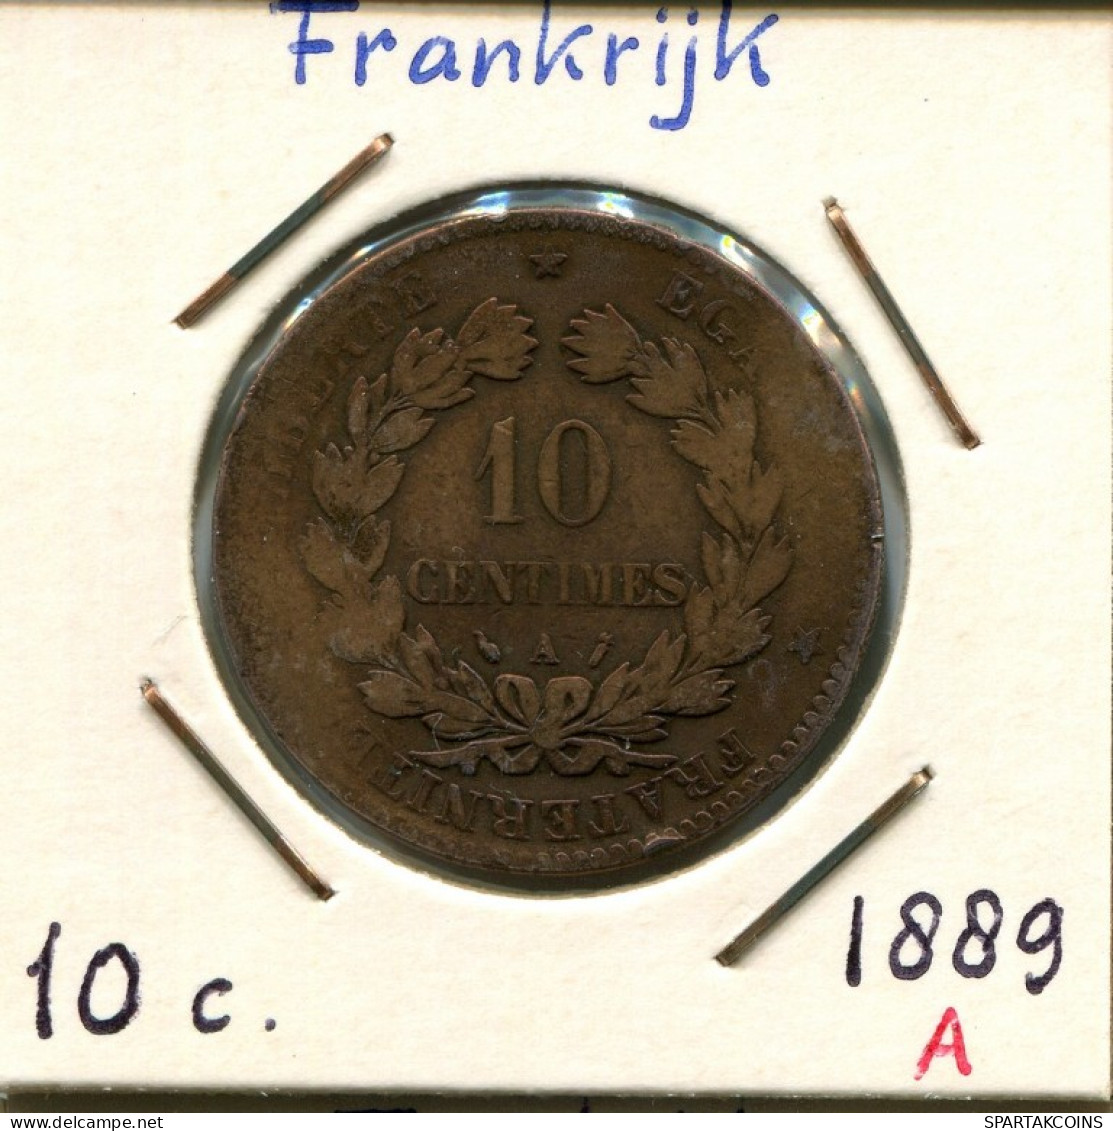 10 CENTIMES 1889 A FRANCE French Coin #AM079.U.A - 10 Centimes